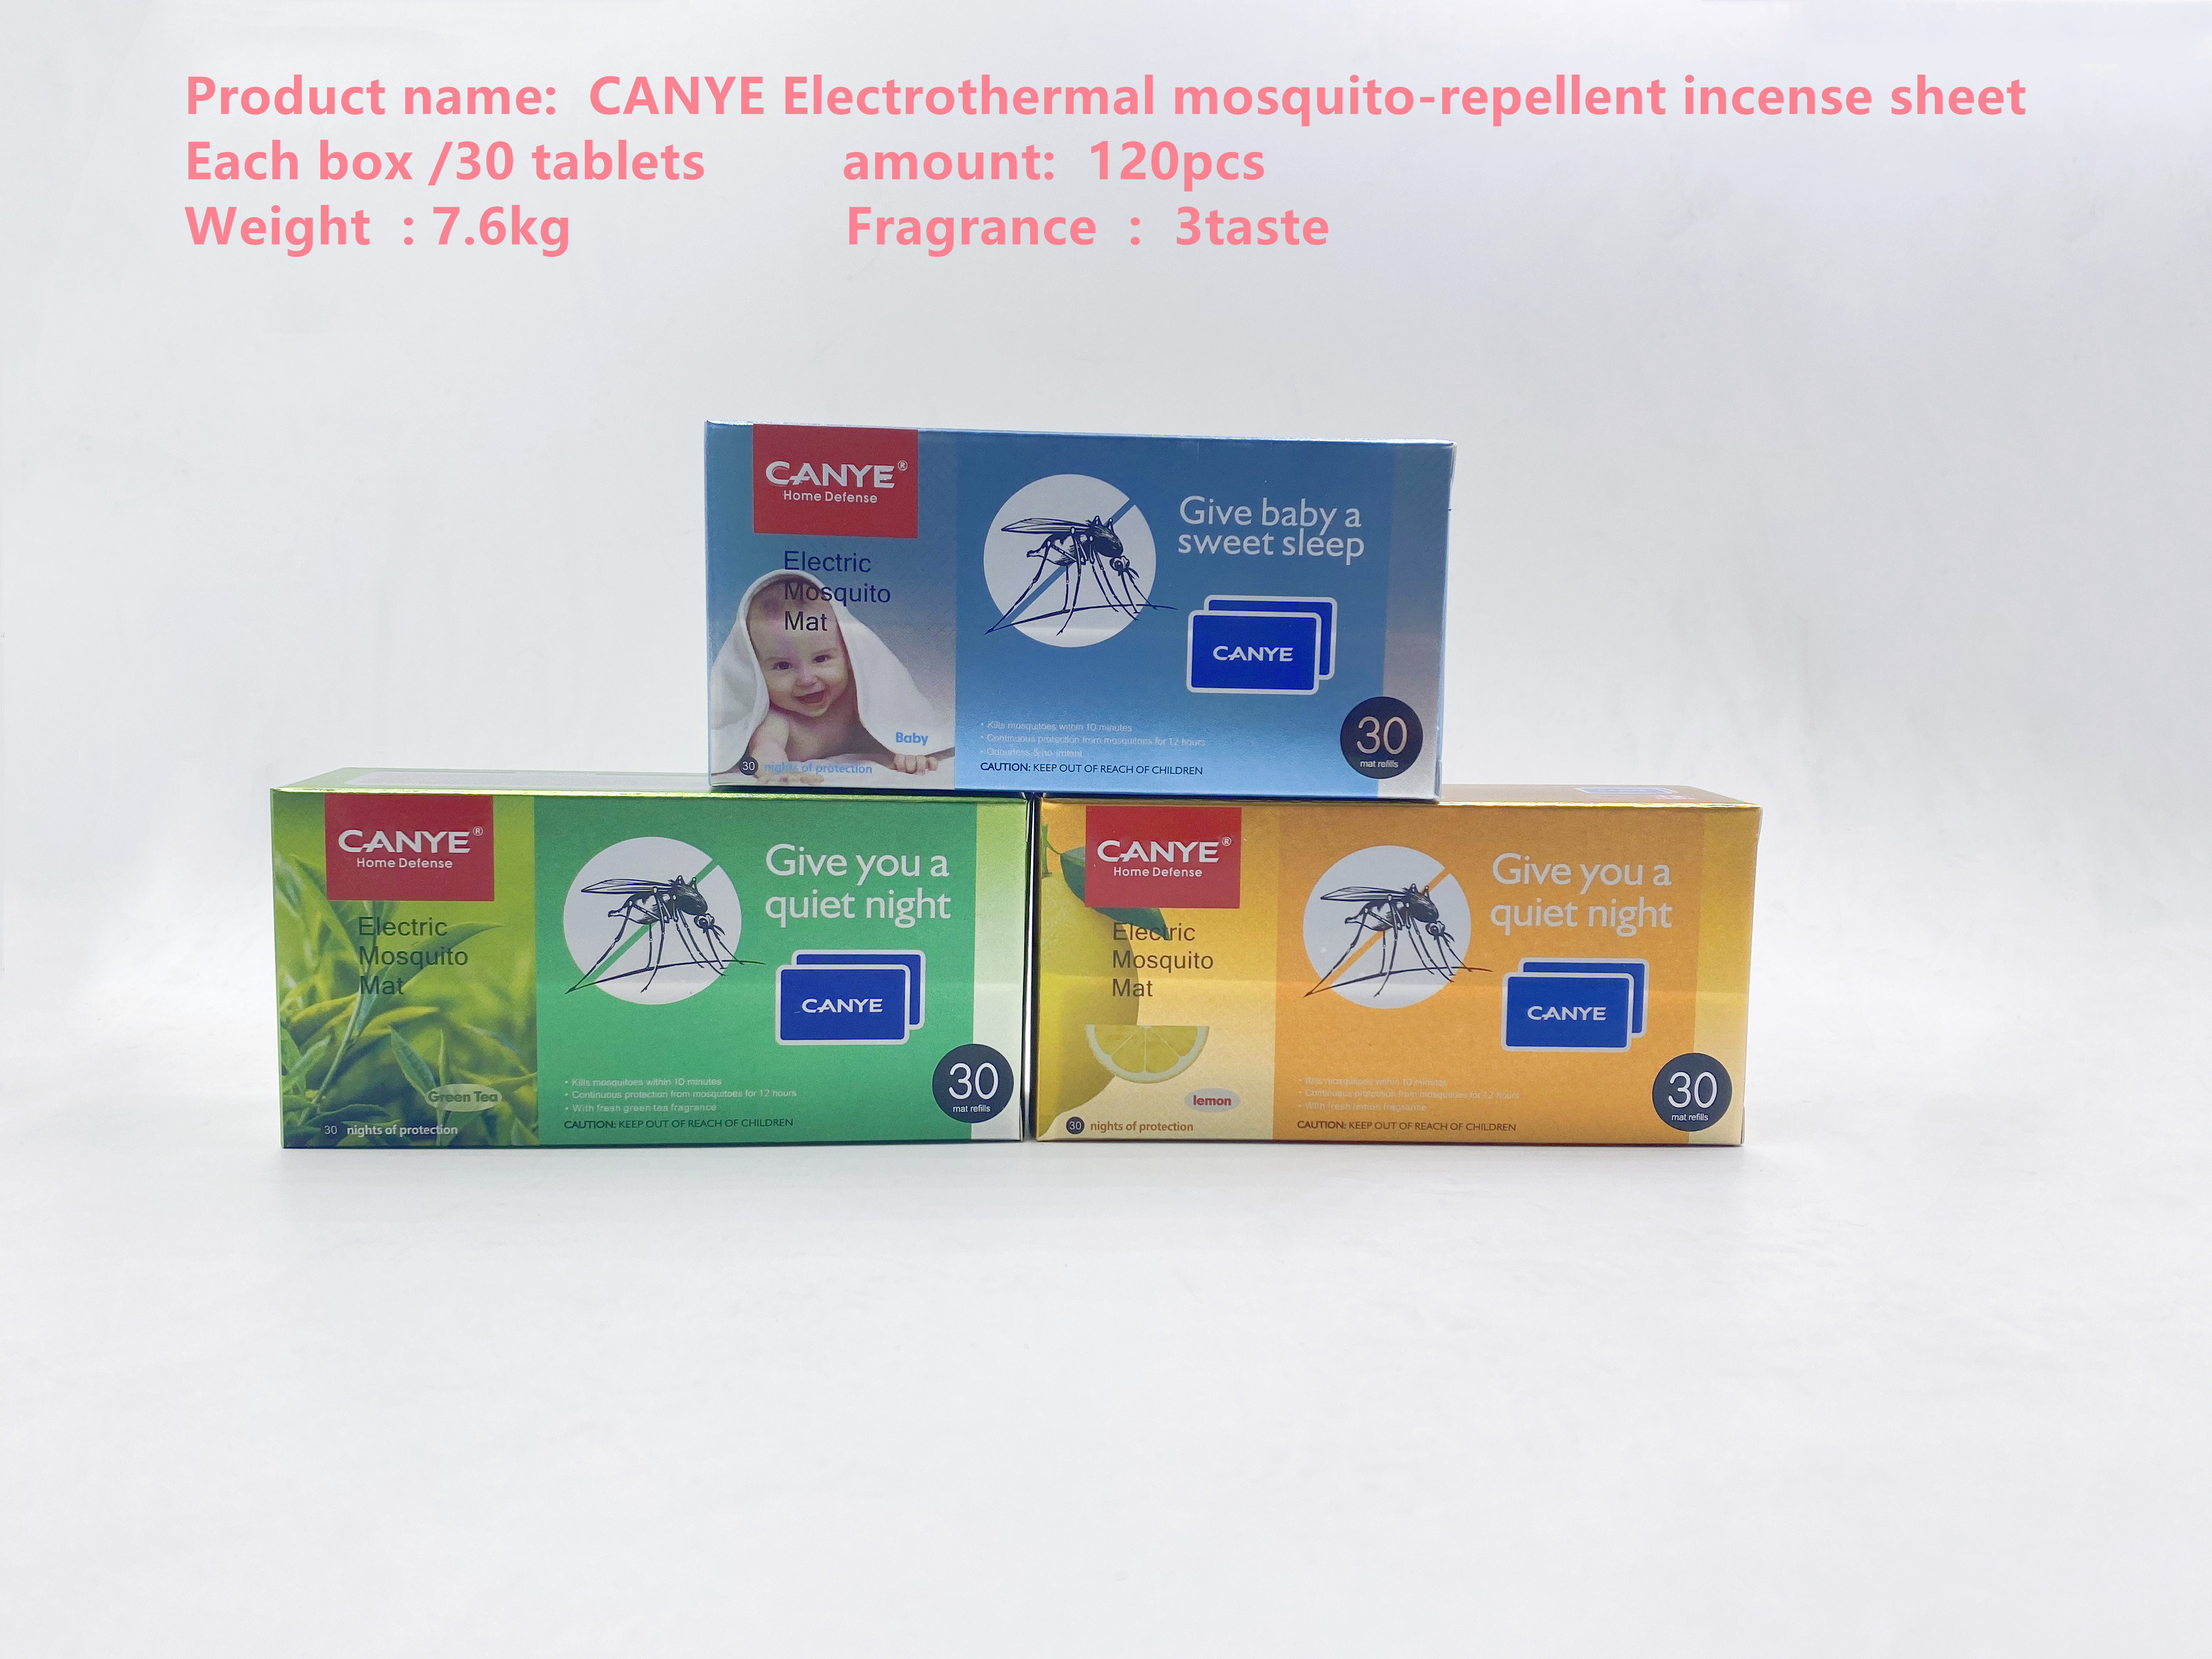 CANYE 川野电热蚊香片Electrothermal mosquito-repellent incense sheet详情1